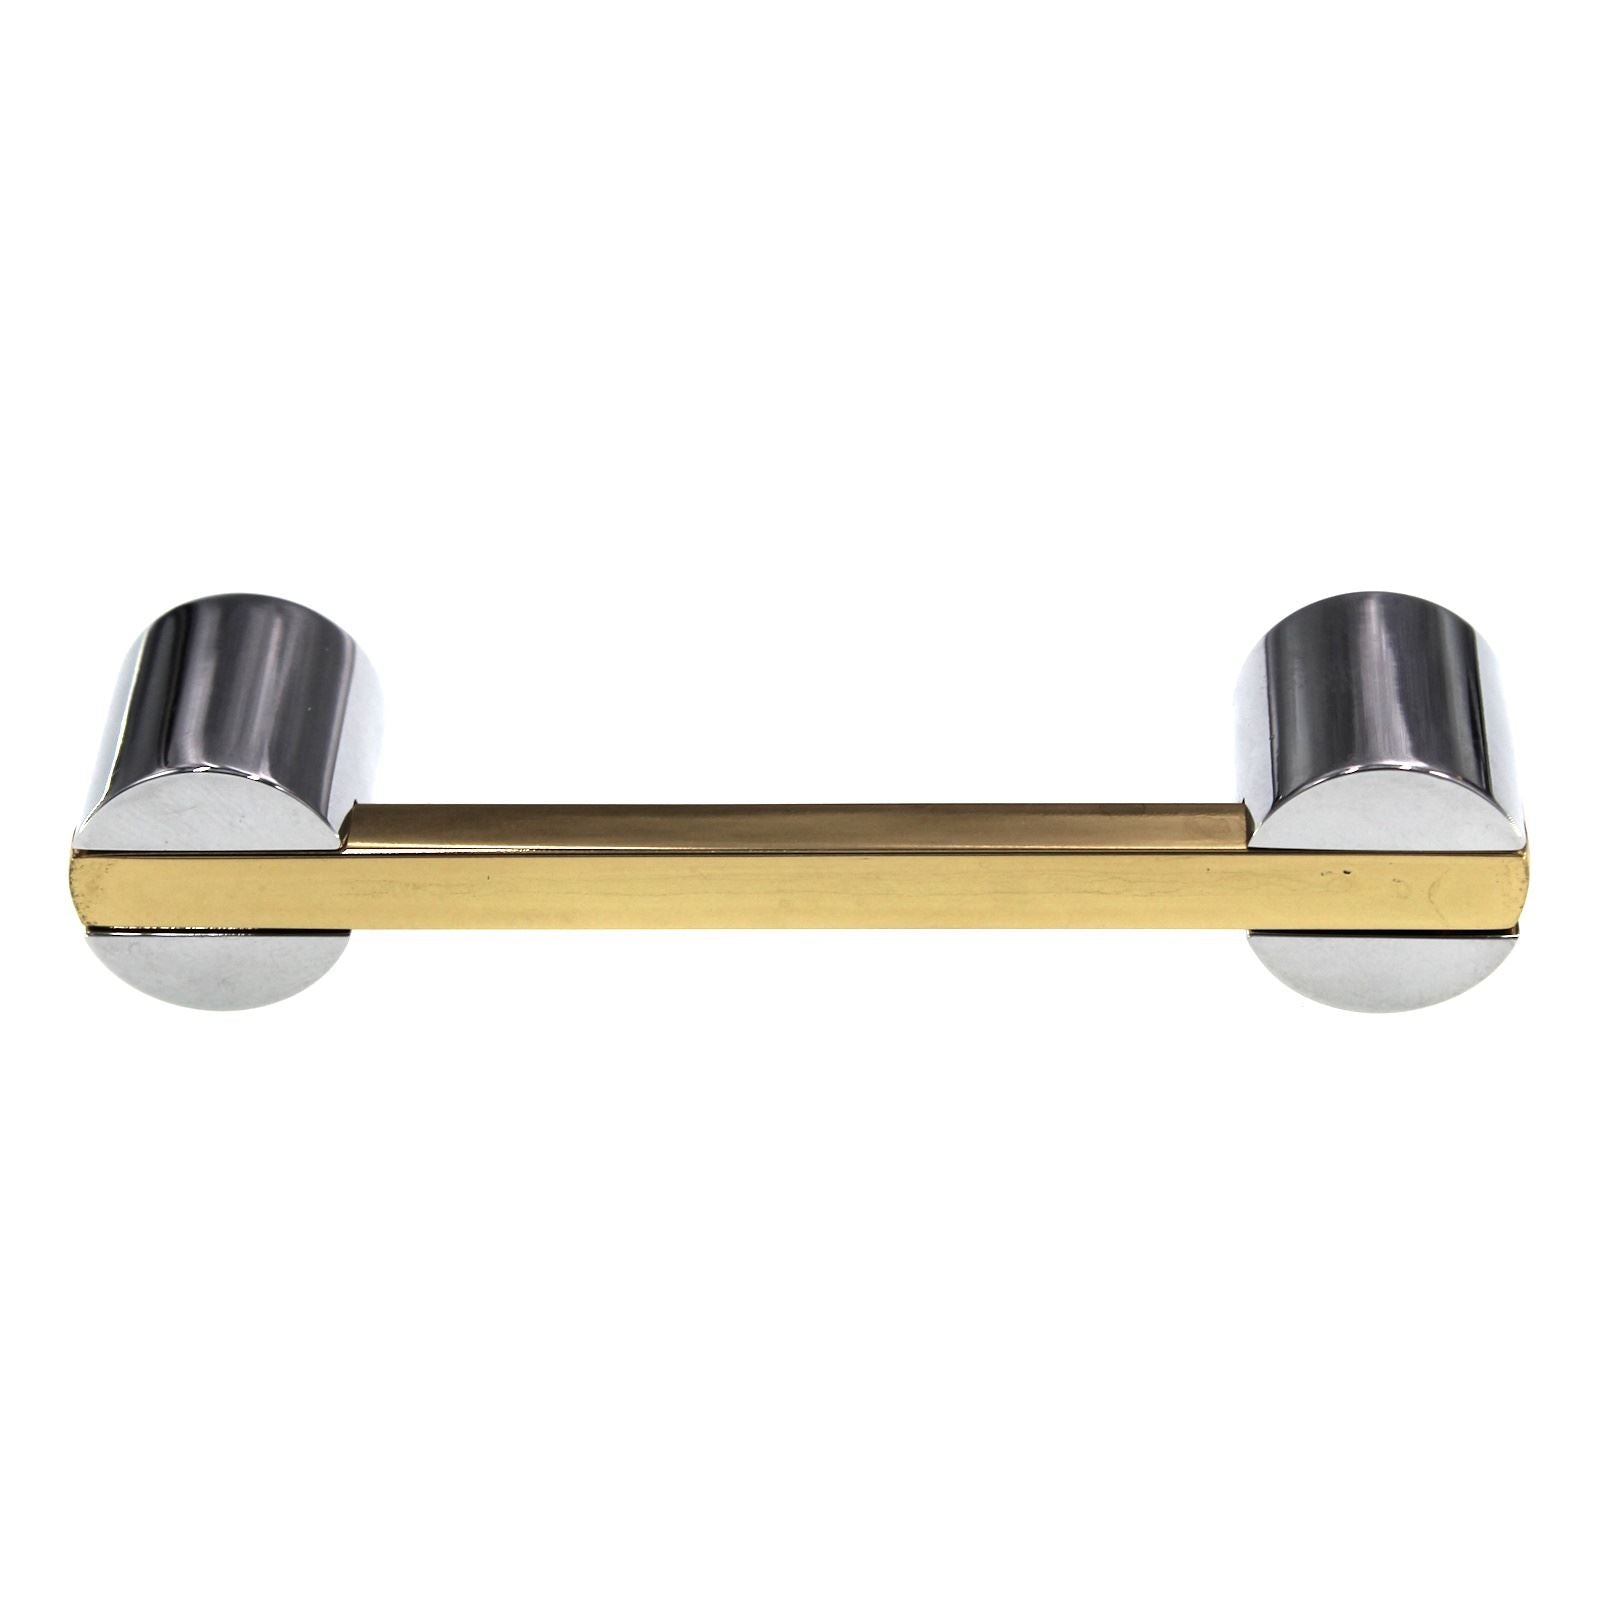 Period Brass Cabinet Pull 3" Ctr Two-Tone Polished Brass Solid Brass C135